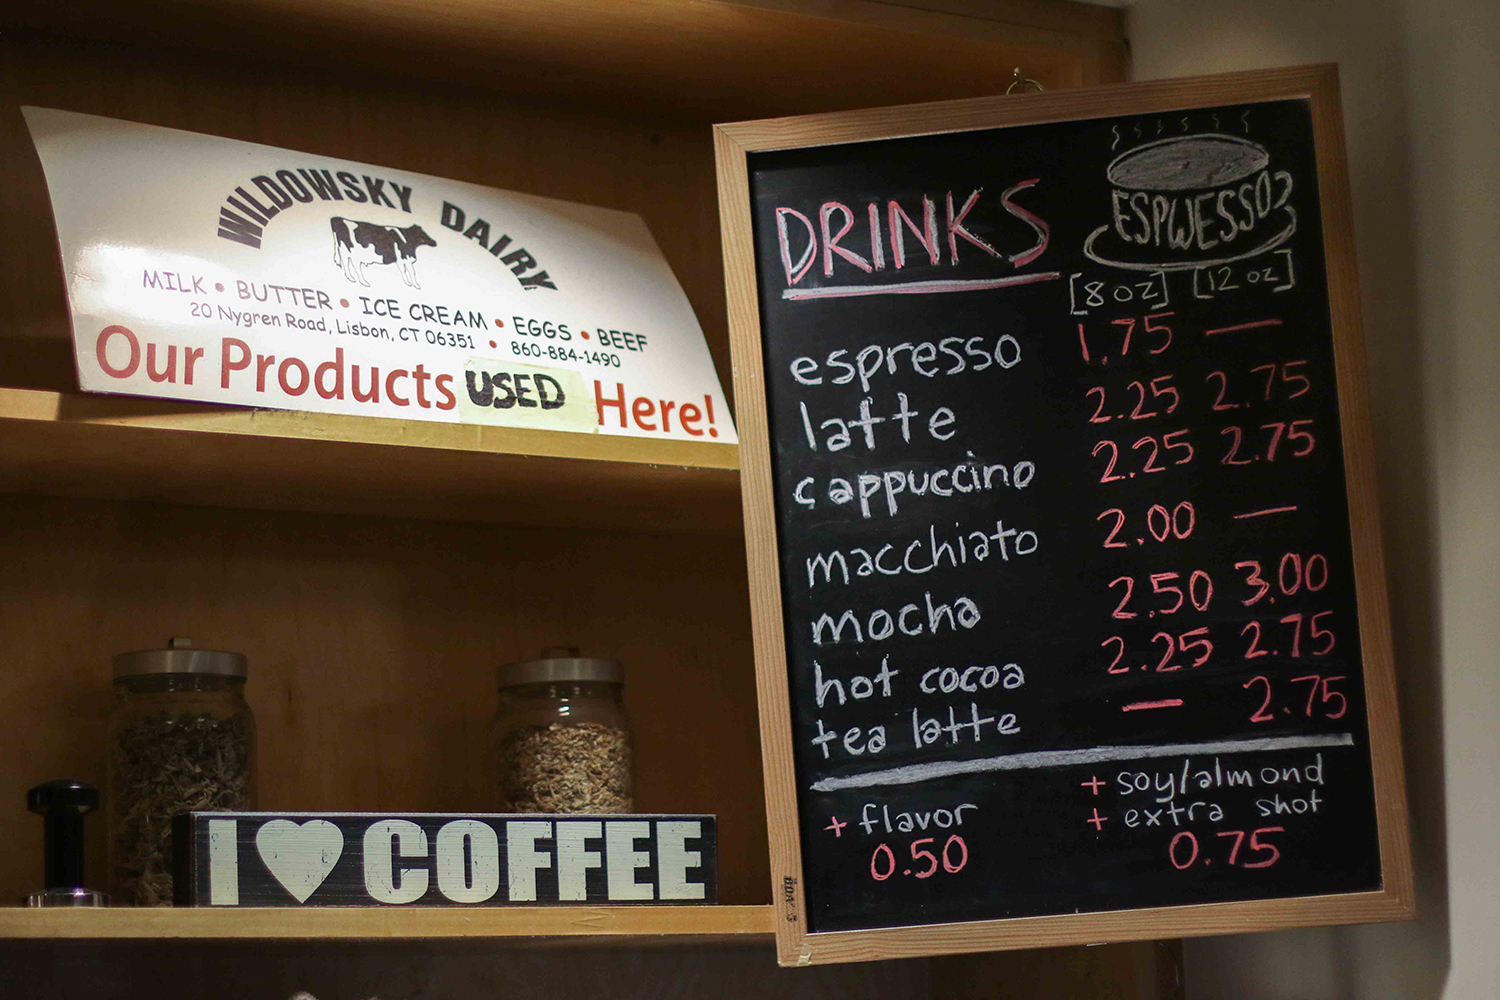 Lower prices keep the premium coffee and specialty drinks affordable.